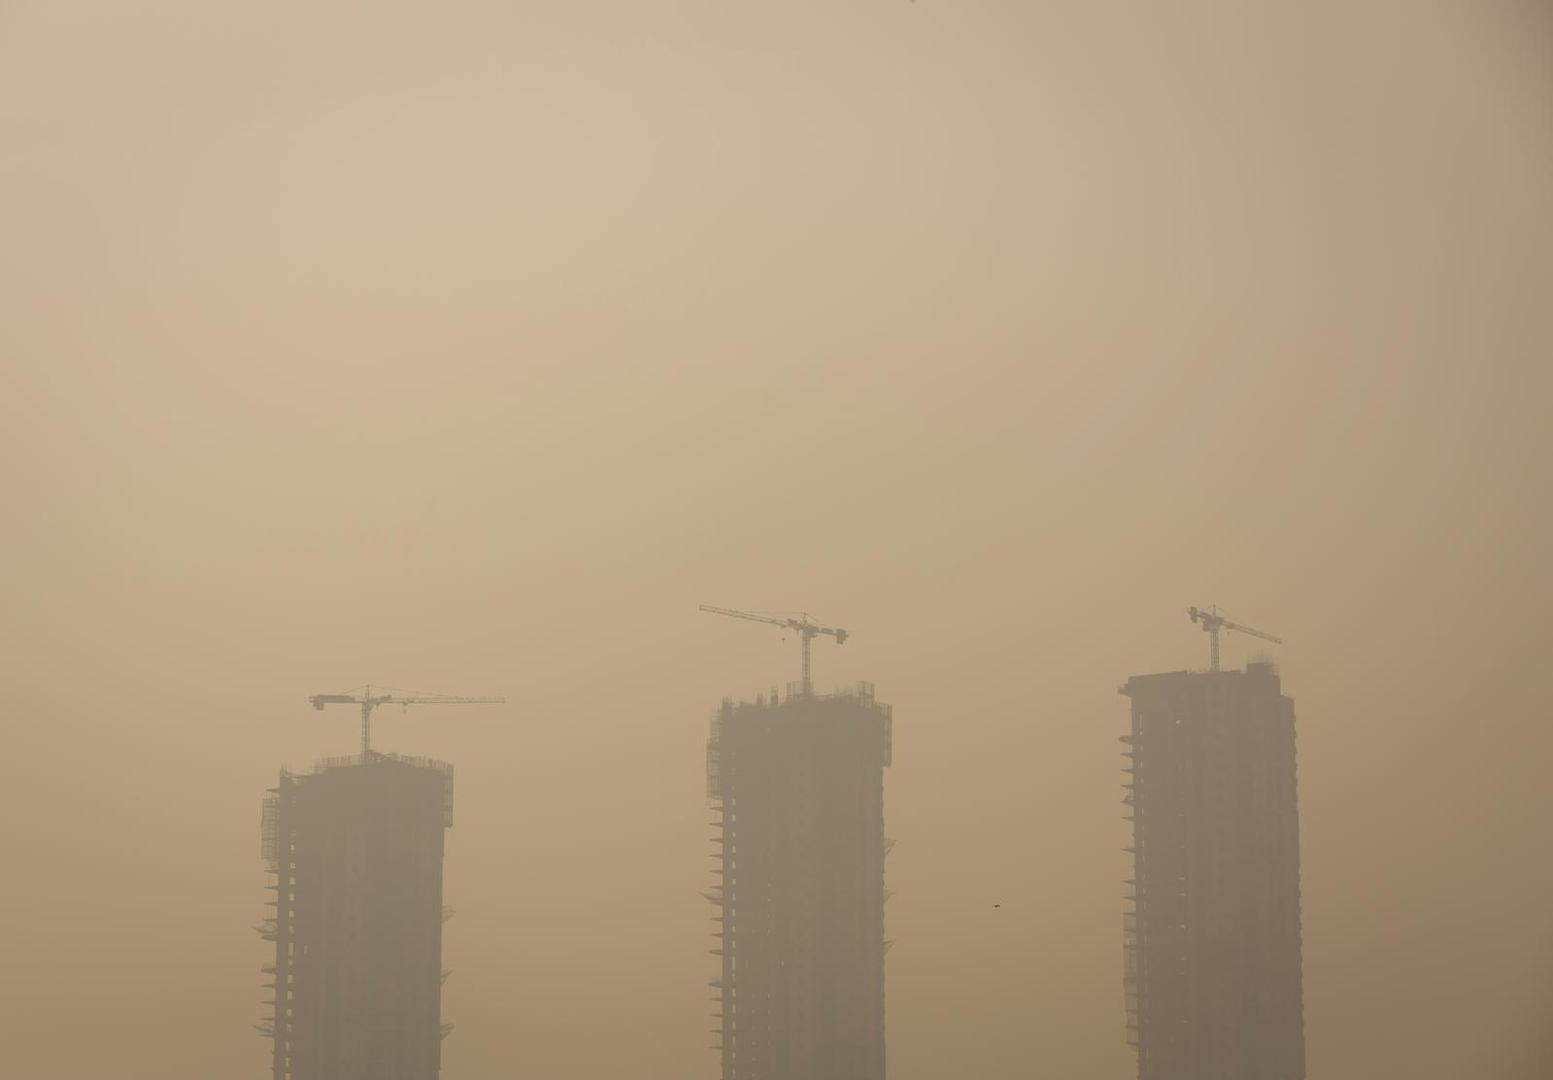 Residential buildings under construction are seen shrouded in heavy smog in Noida, on the outskirts of New Delhi, India, November 6, 2022. On November 6 at 10:00 IST, Sector 116 in Noida, , the closest monitoring station, registered a PM 2.5 reading of 398.        REUTERS/Adnan Abidi         SEARCH "ABIDI POLLUTION INDIA" FOR THIS STORY. SEARCH "WIDER IMAGE" FOR ALL STORIES. Photo: ADNAN ABIDI/REUTERS